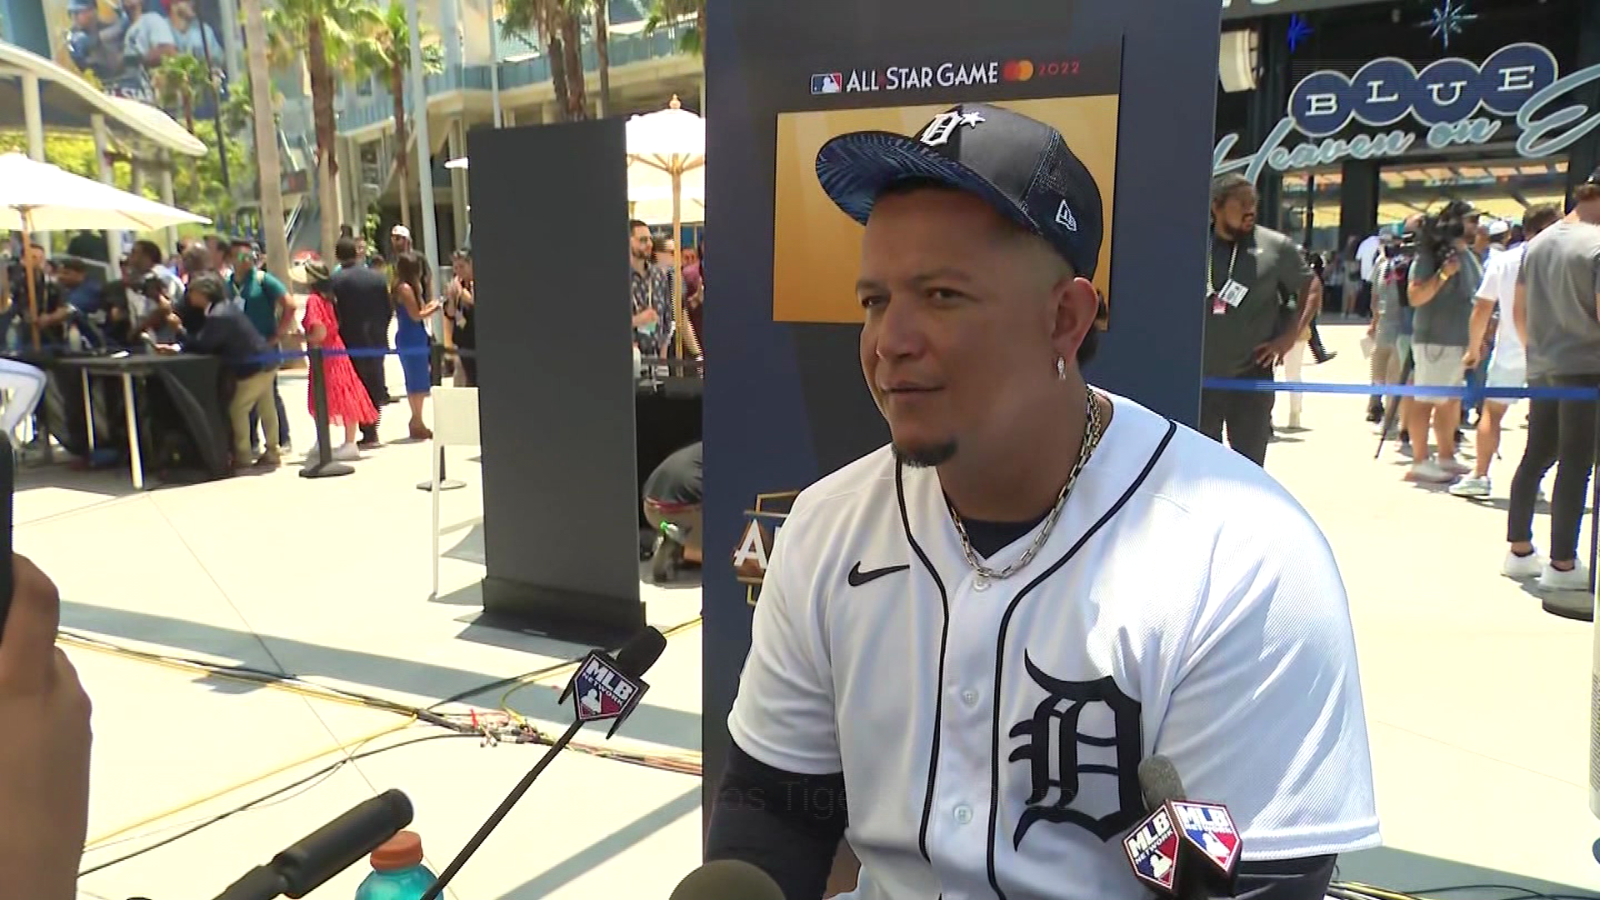 Miguel Cabrera on the All Star Game "I am proud to see so many Latin